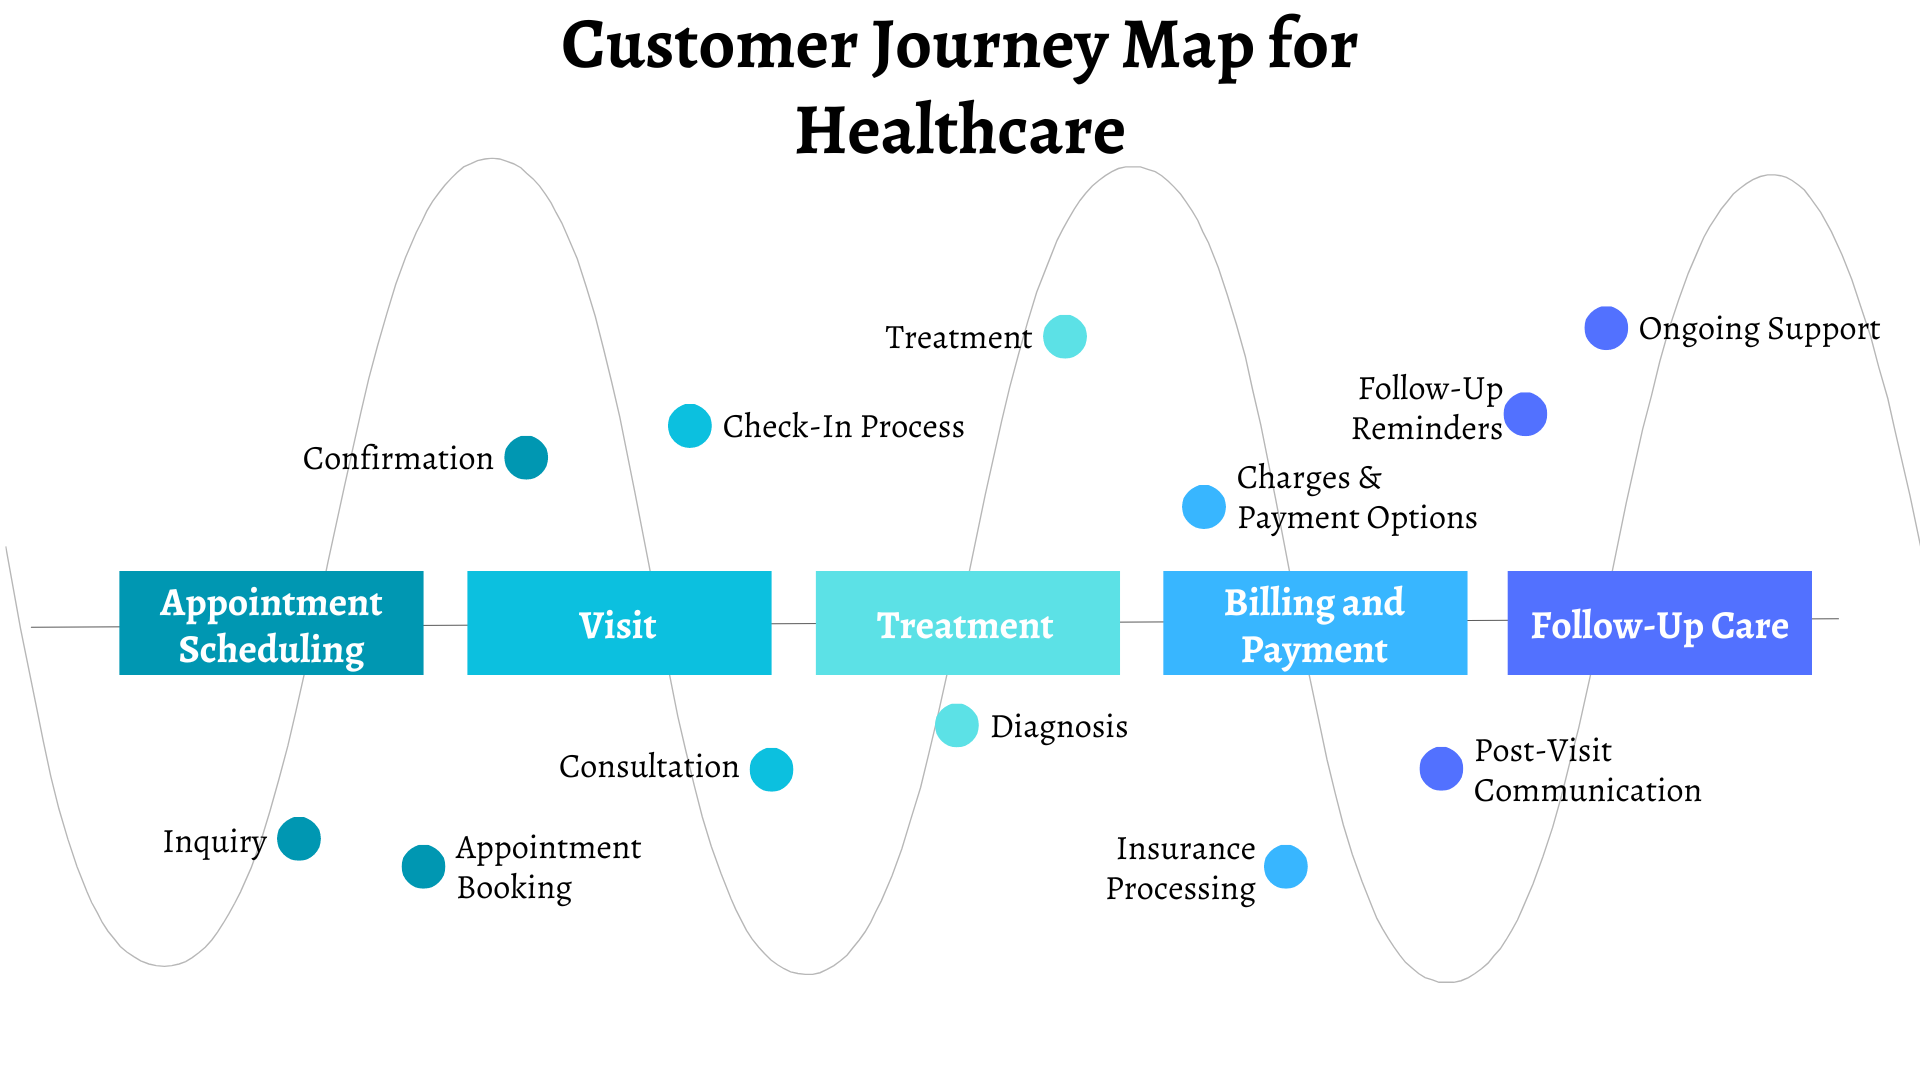 Customer Journey Map for Healthcare